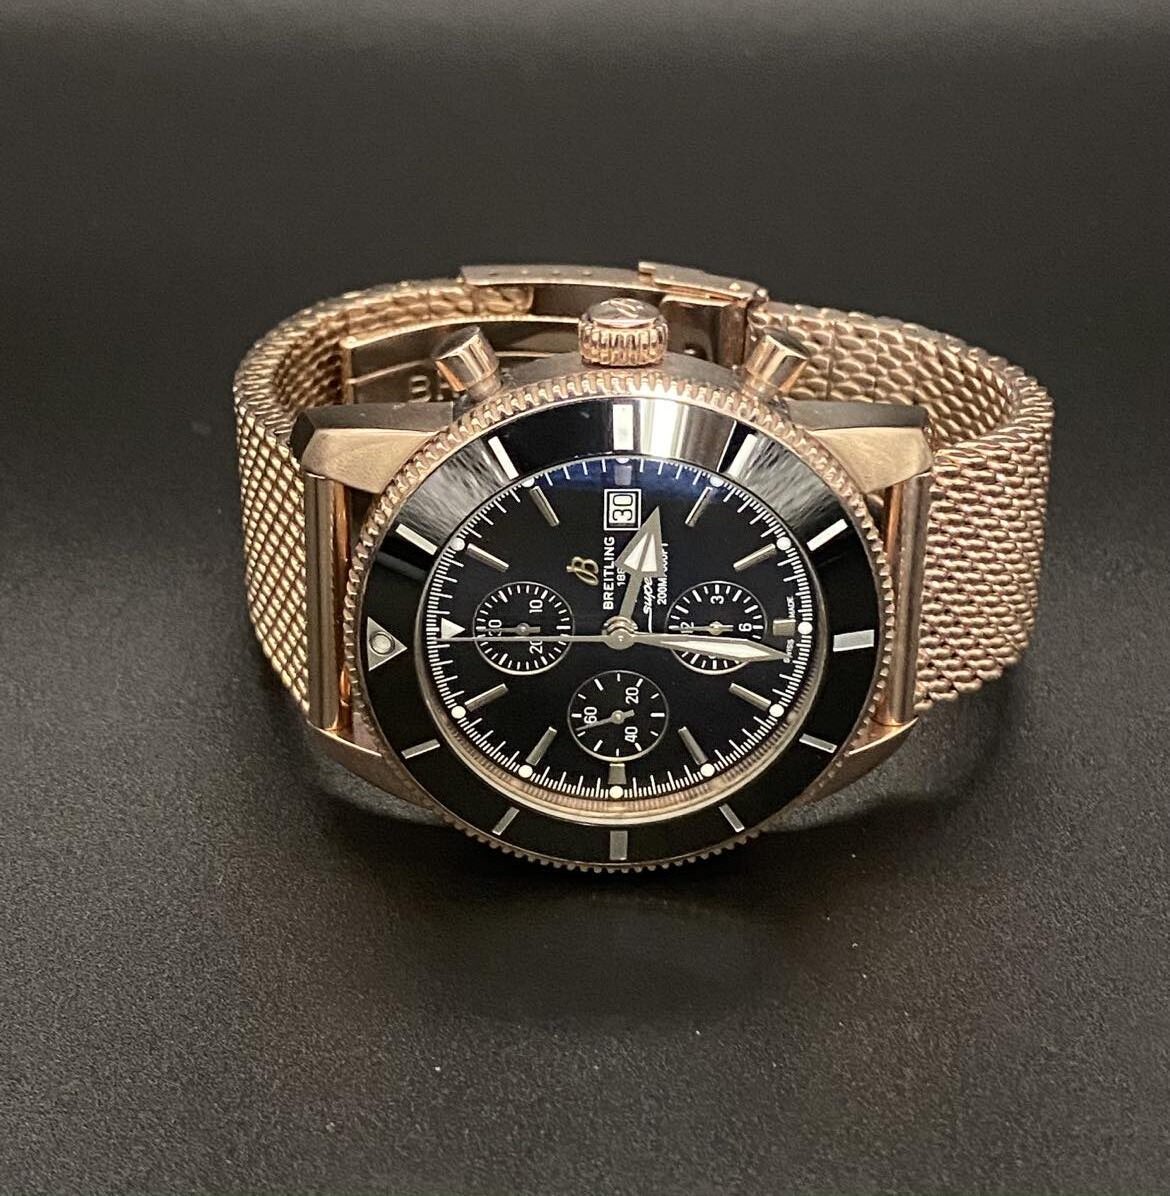 Breitling watch rose gold plated